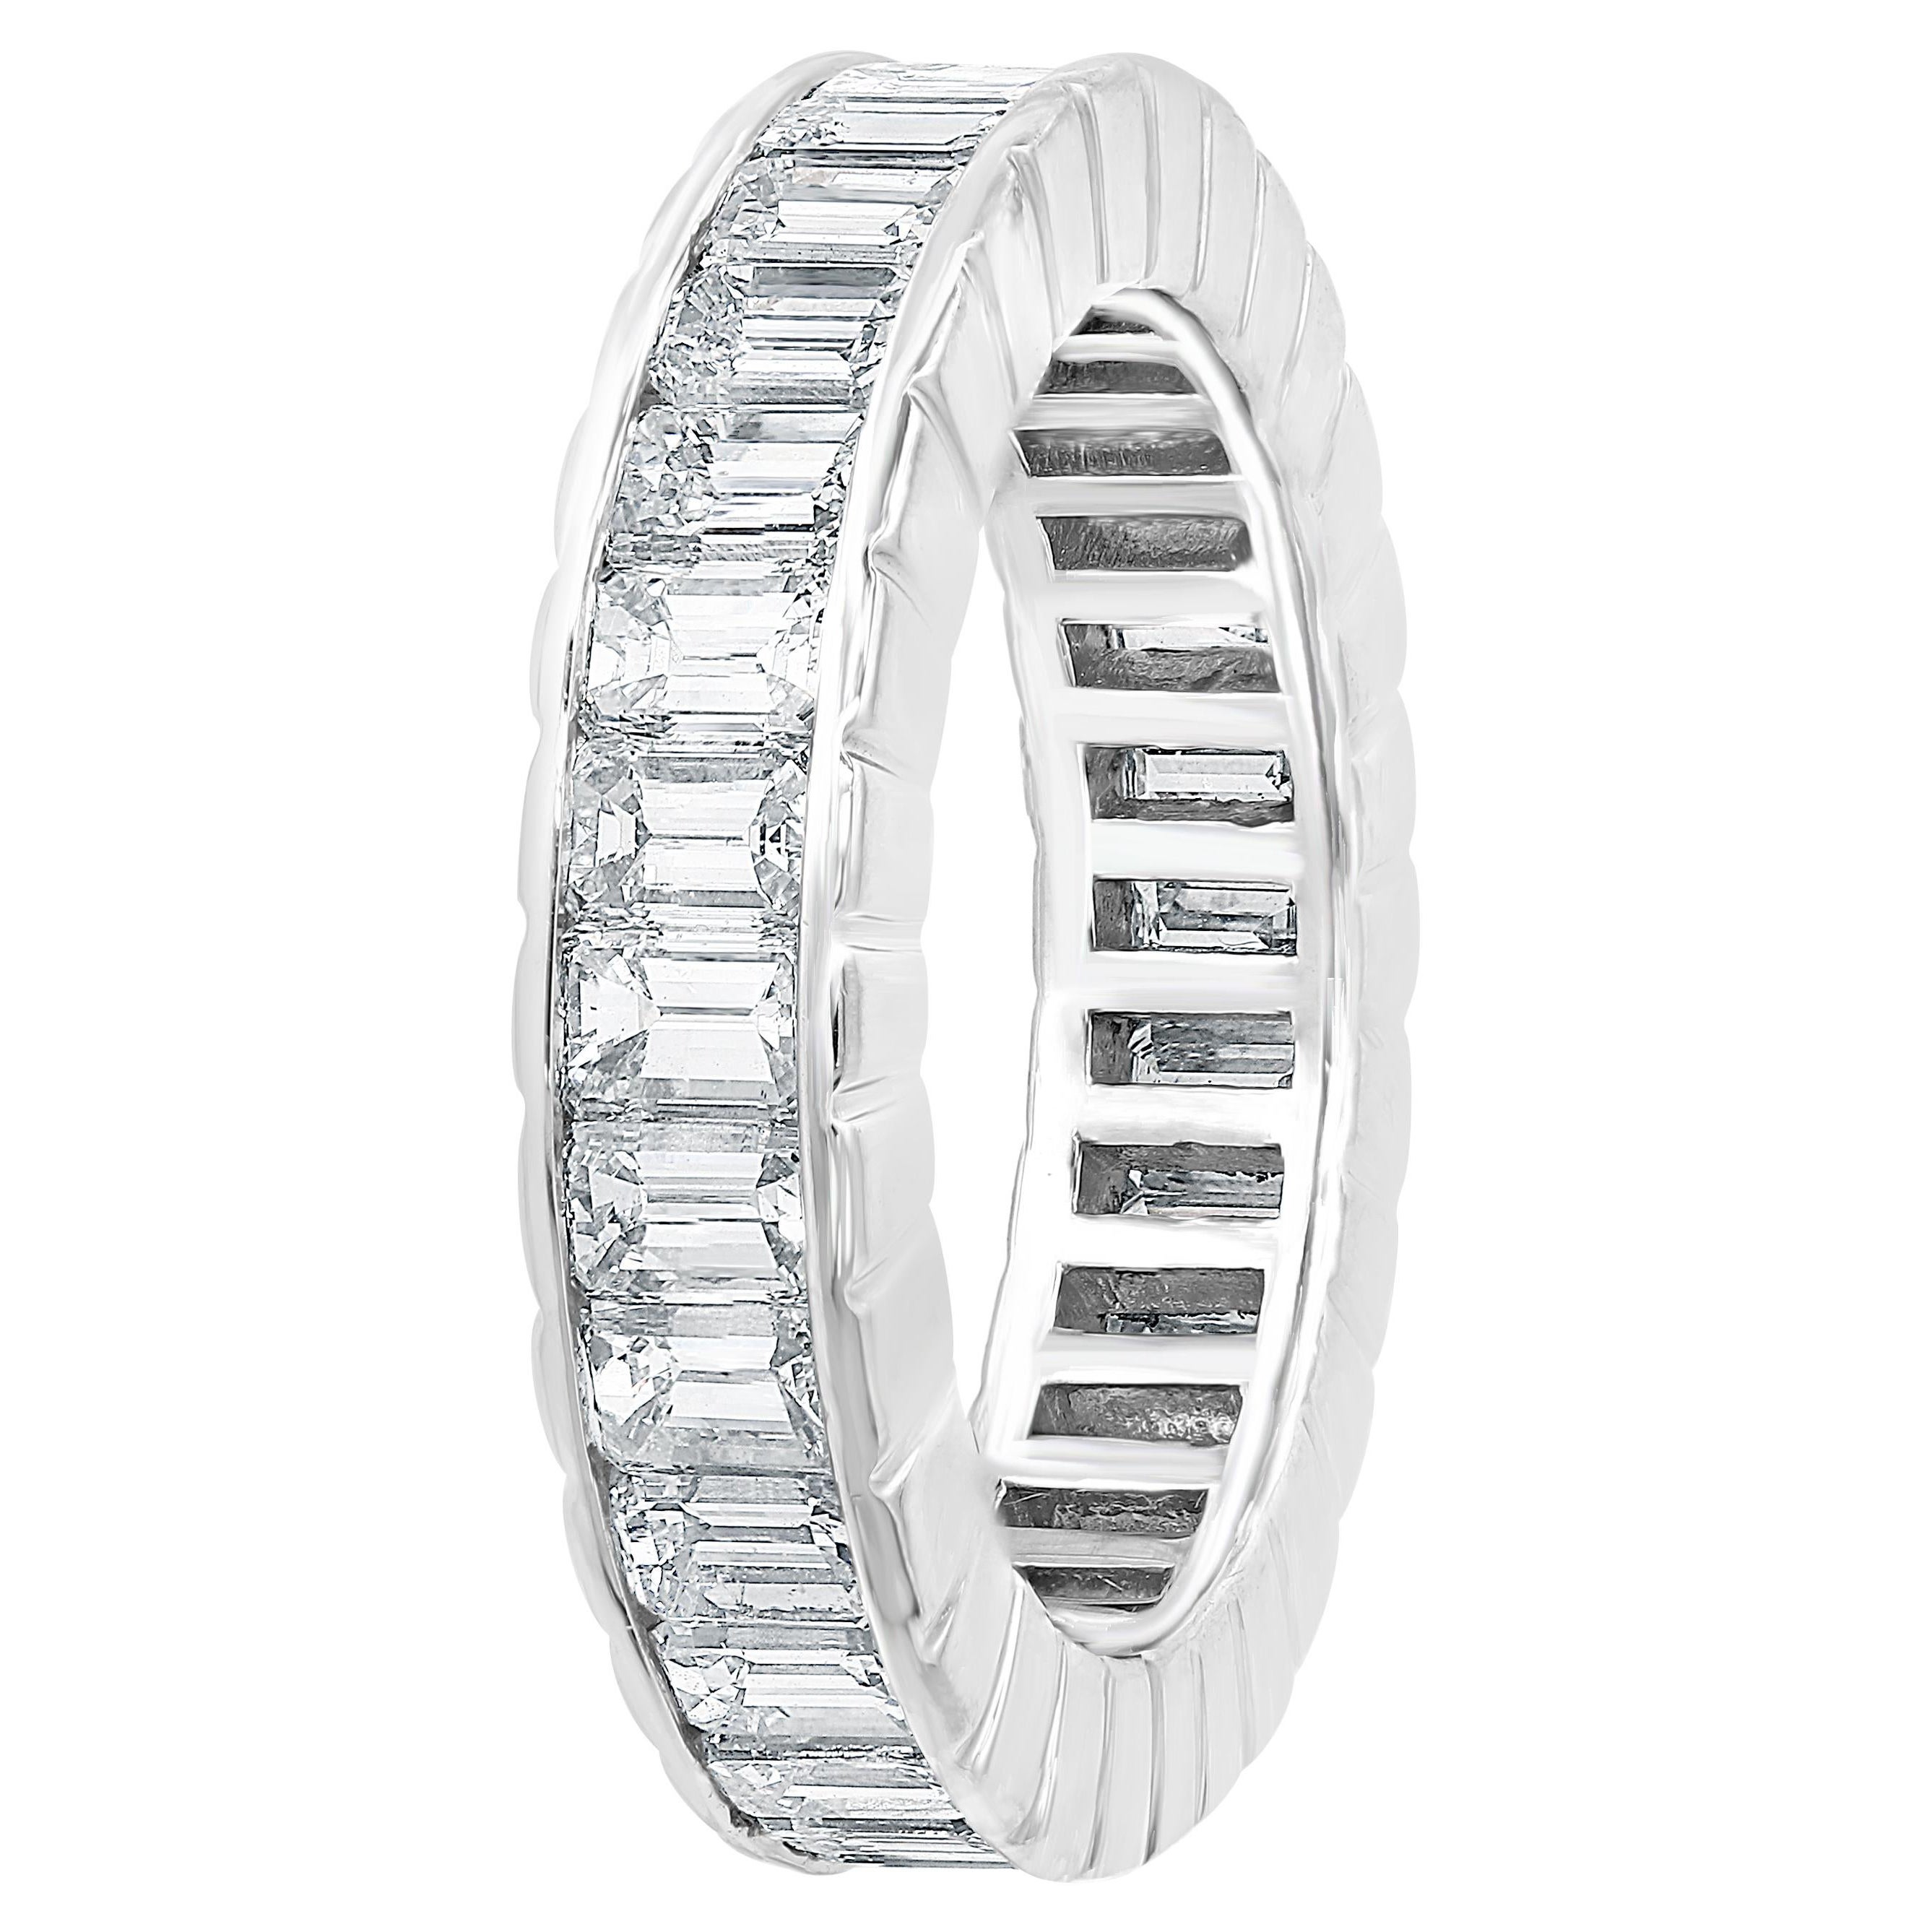 Auction - 3.01 Carat Emerald Cut Diamond Eternity Band Ring For Sale